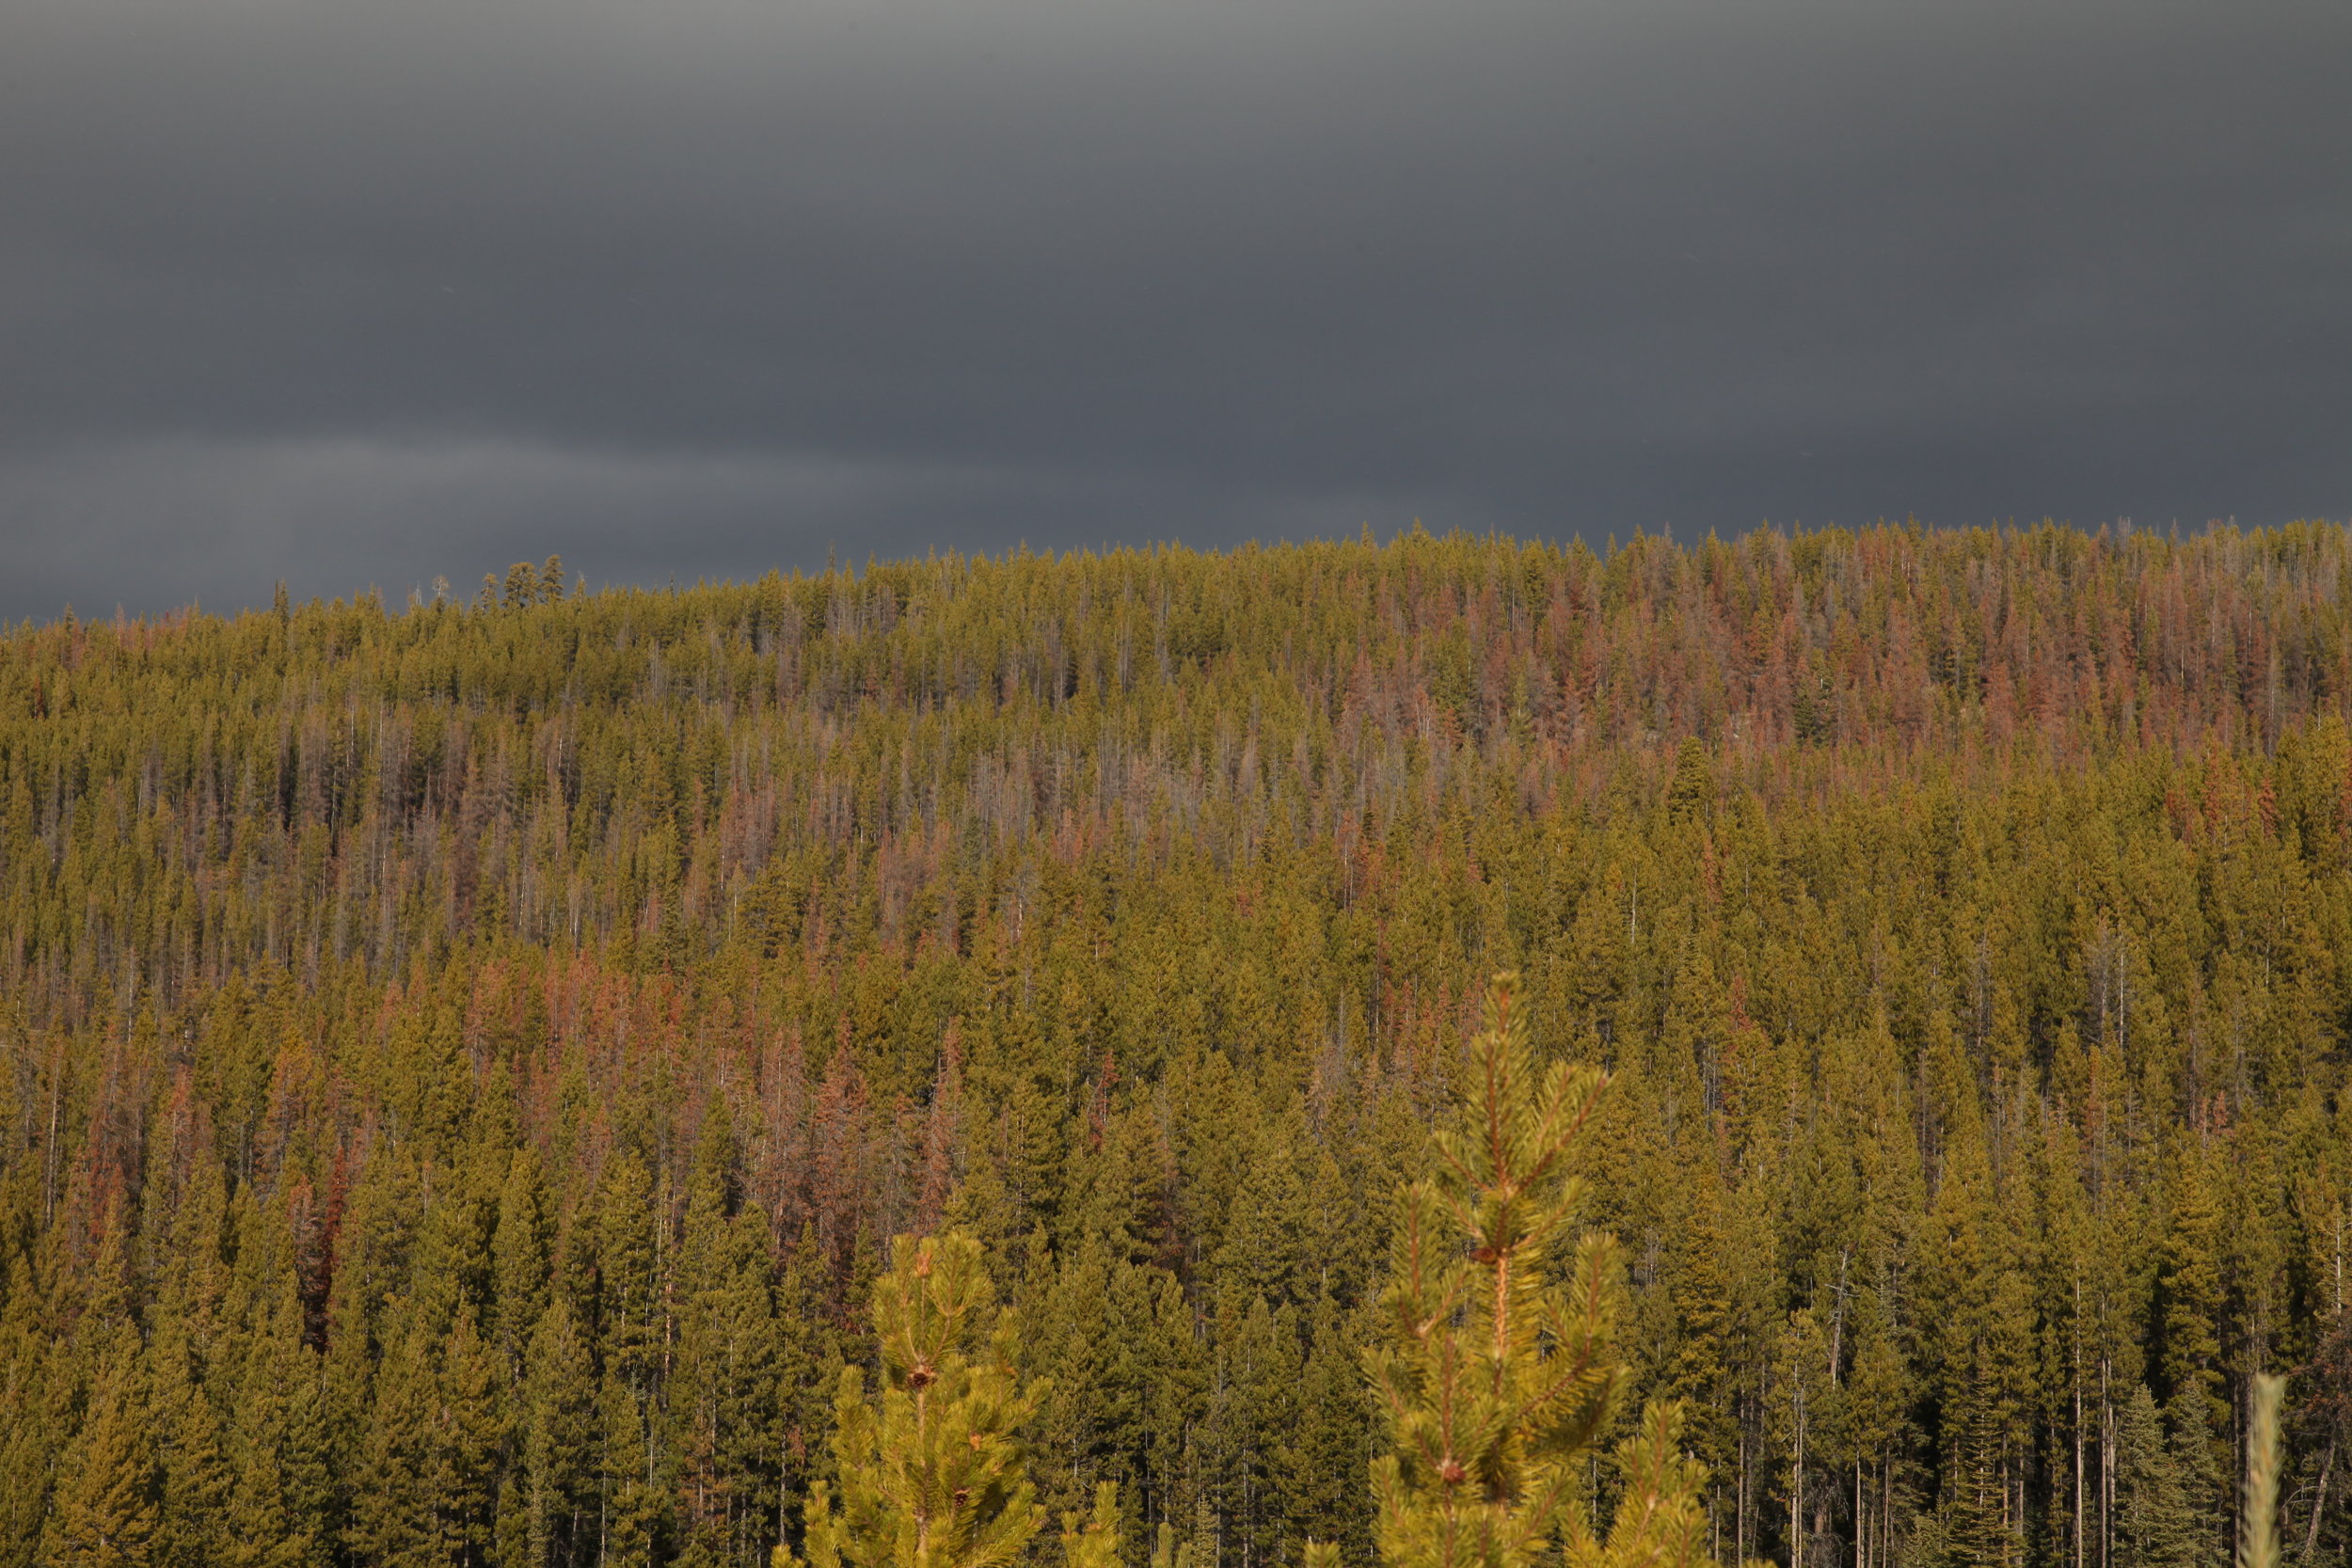  The Mountain Pine Beetle is one form of natural disturbance present in the Sallus Creek watershed. We are continuing to work to restore the resilience of Xaxli’p forests to natural disturbances.     